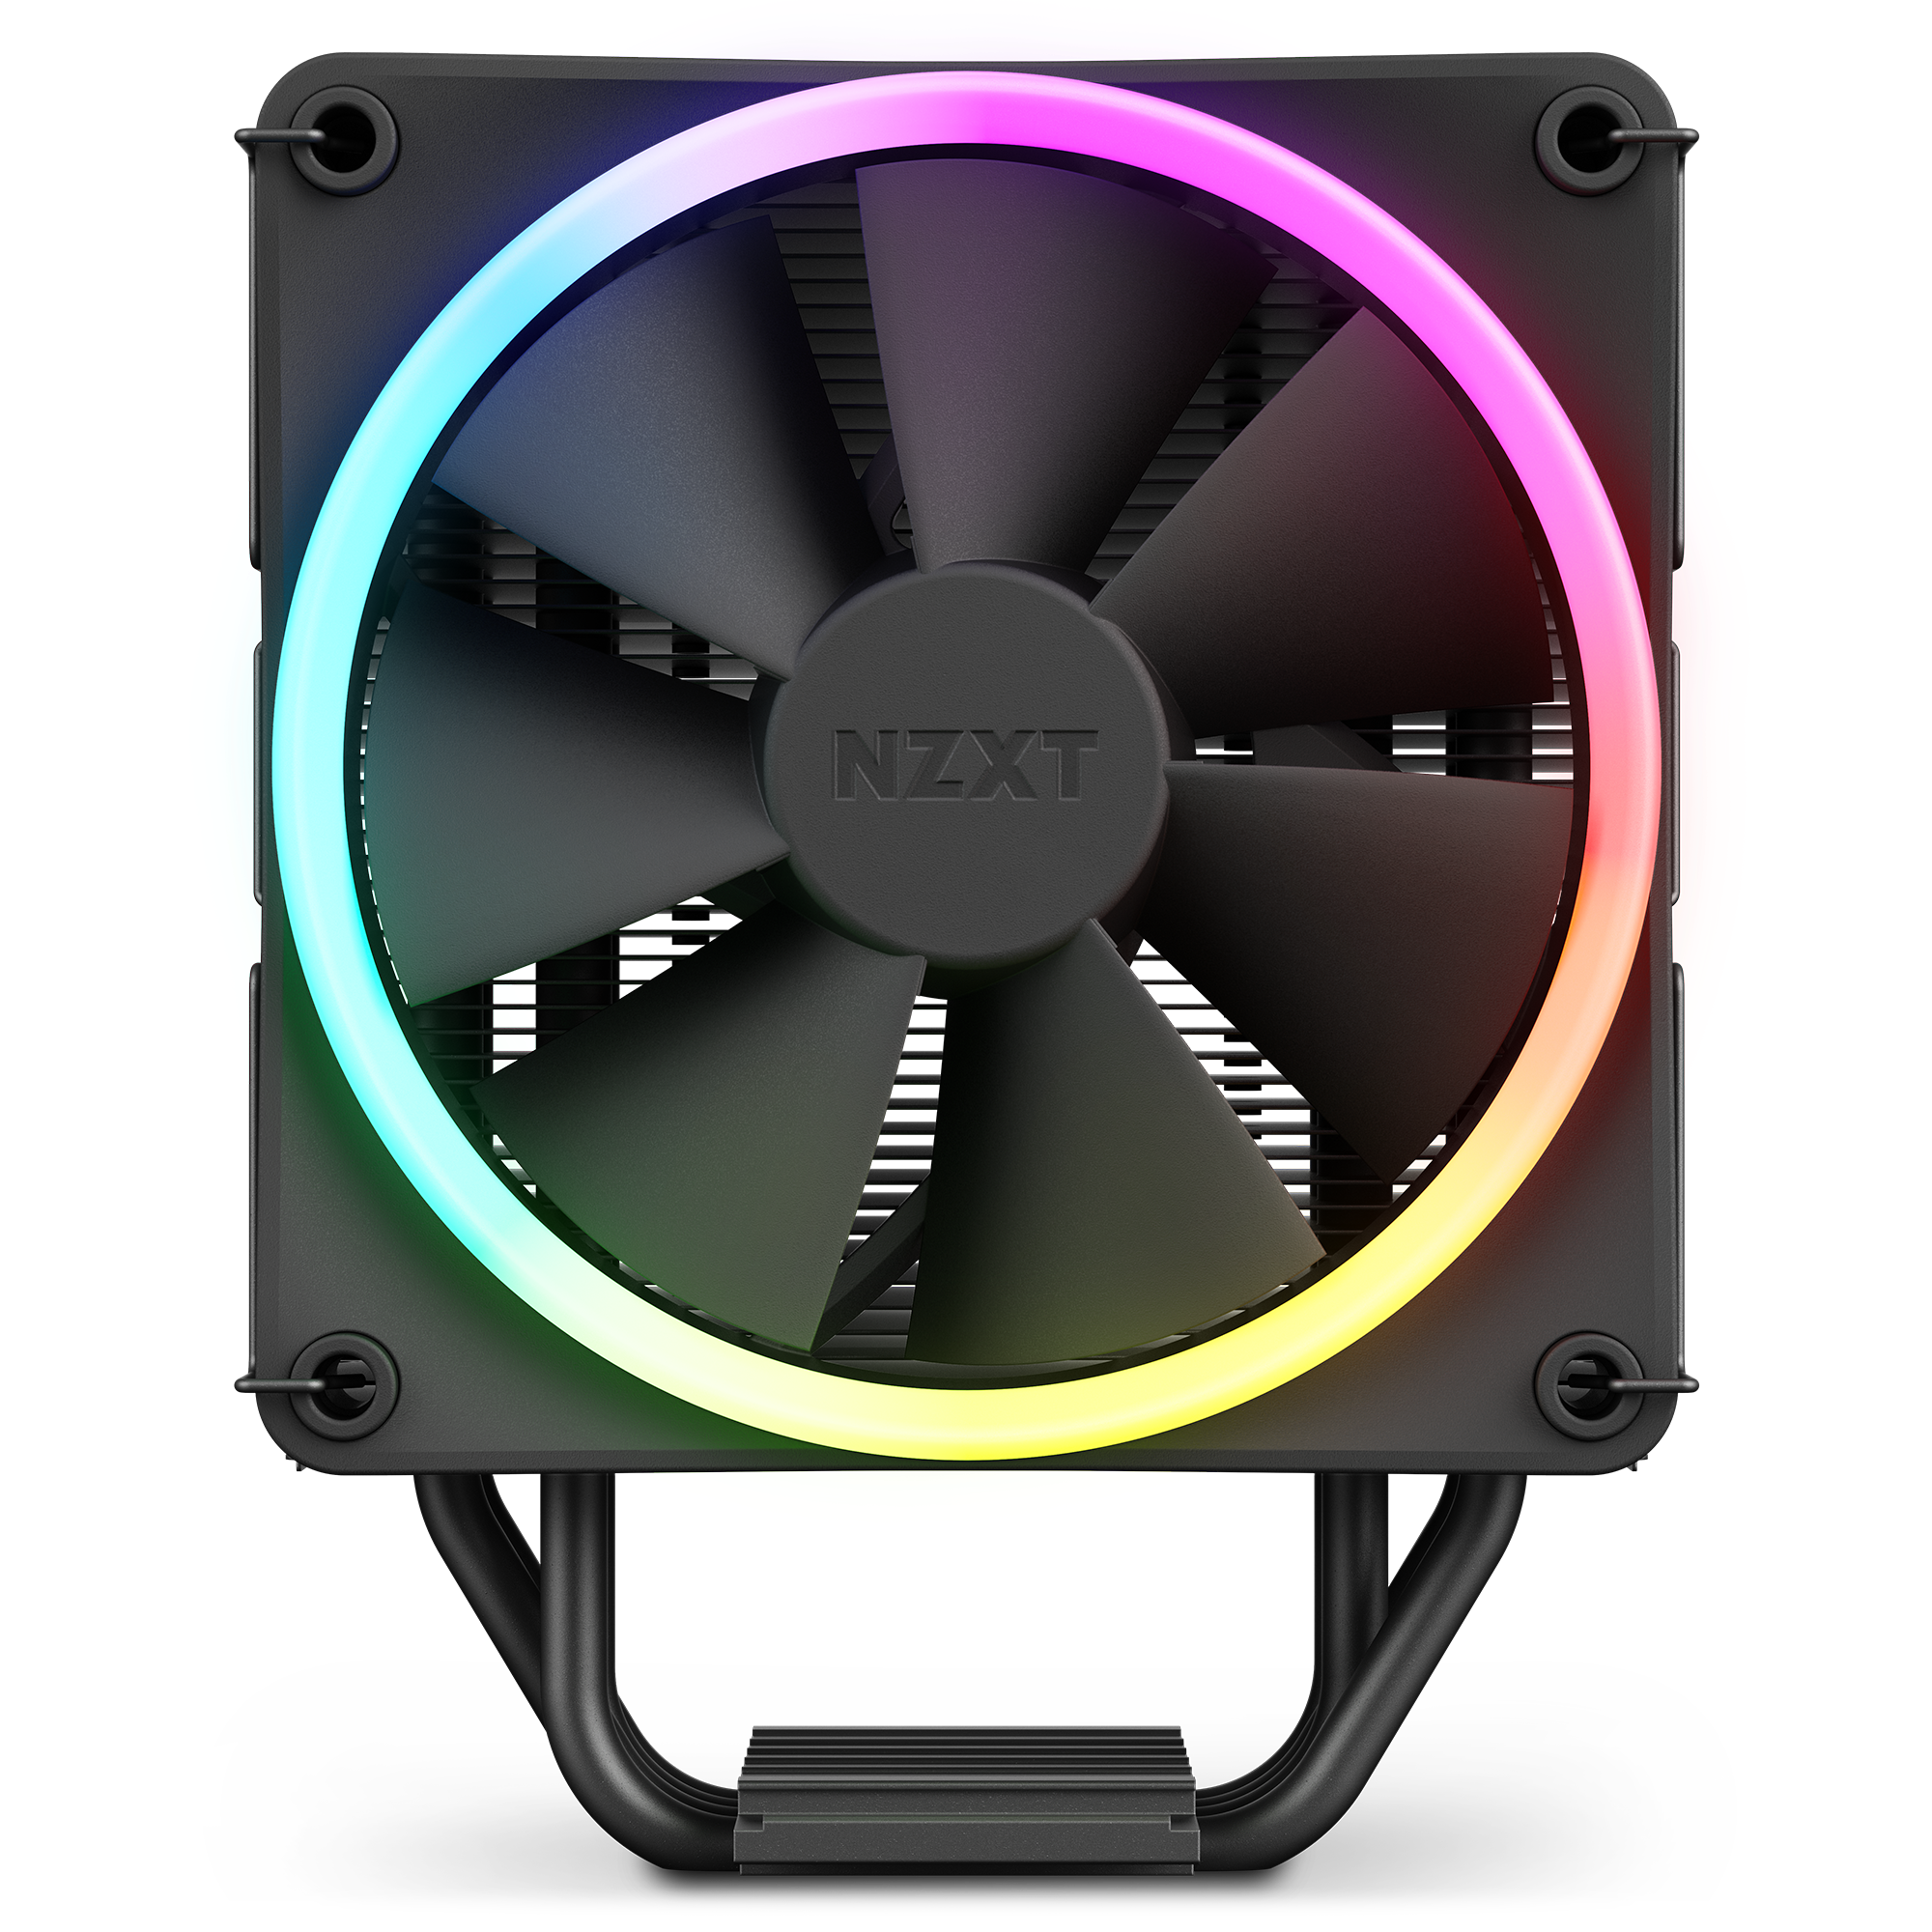 Cooler NZXT T120 RGB - Albagame